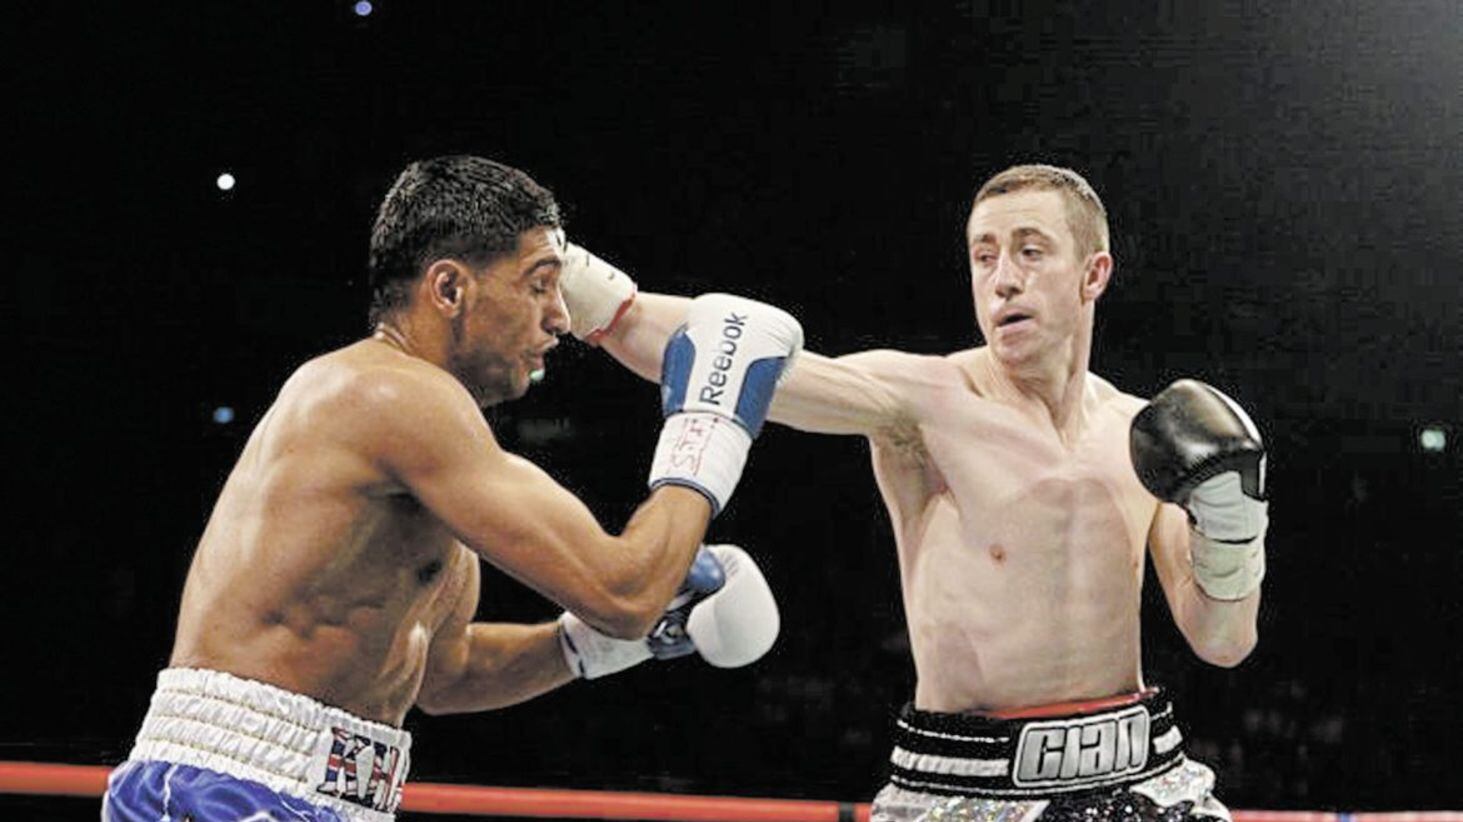 Cheated not defeated? Paul McCloskey against Amir Khan in the WBA World Light Welterweight Title fight at the M.E.N Arena Manchester in 2011 